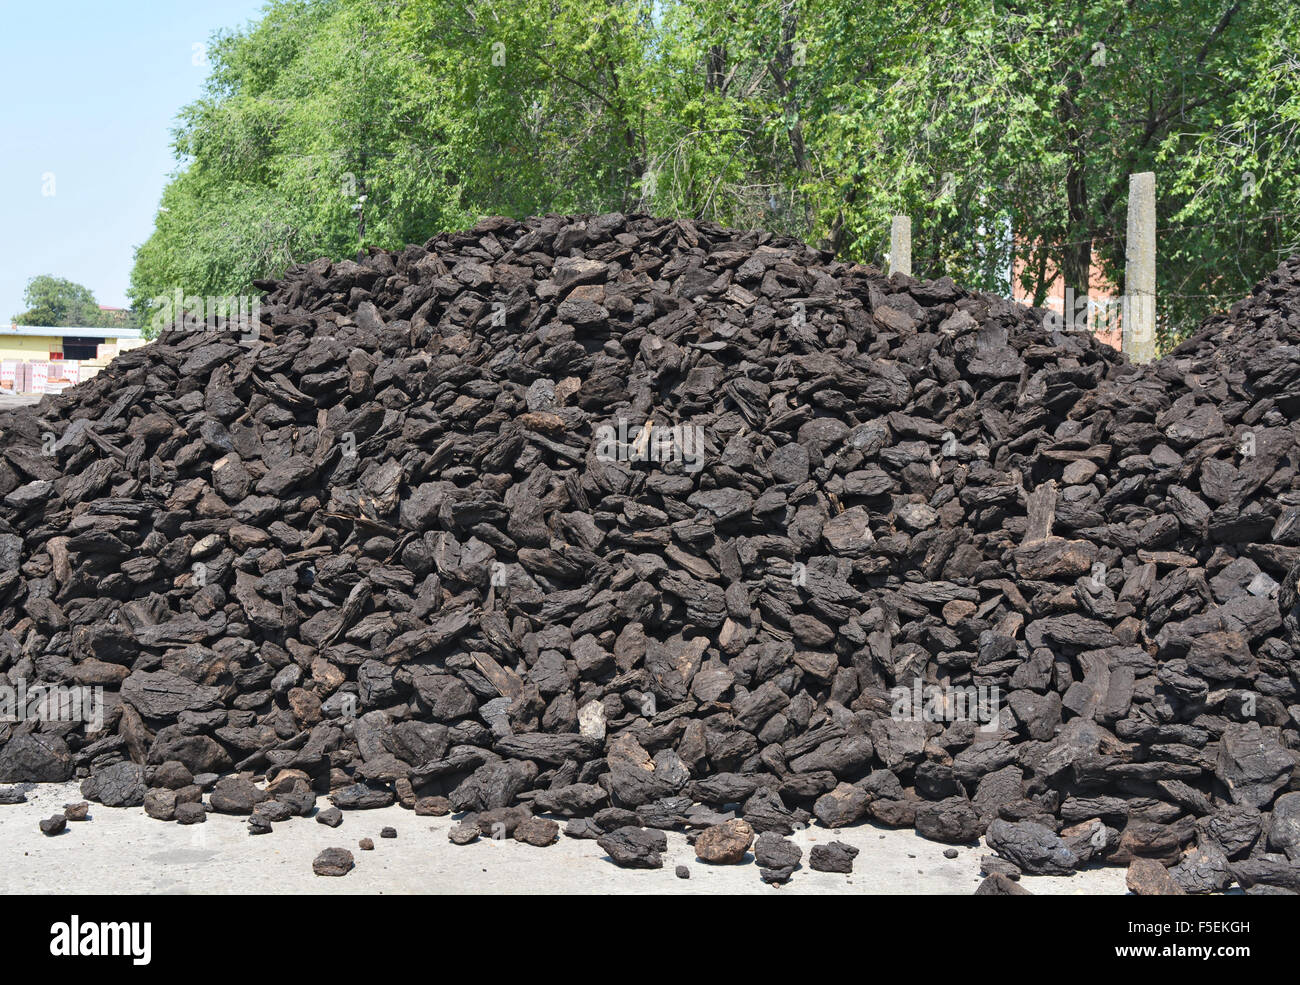 Good value and good quality coal in stock waiting for the first customers. Stock Photo